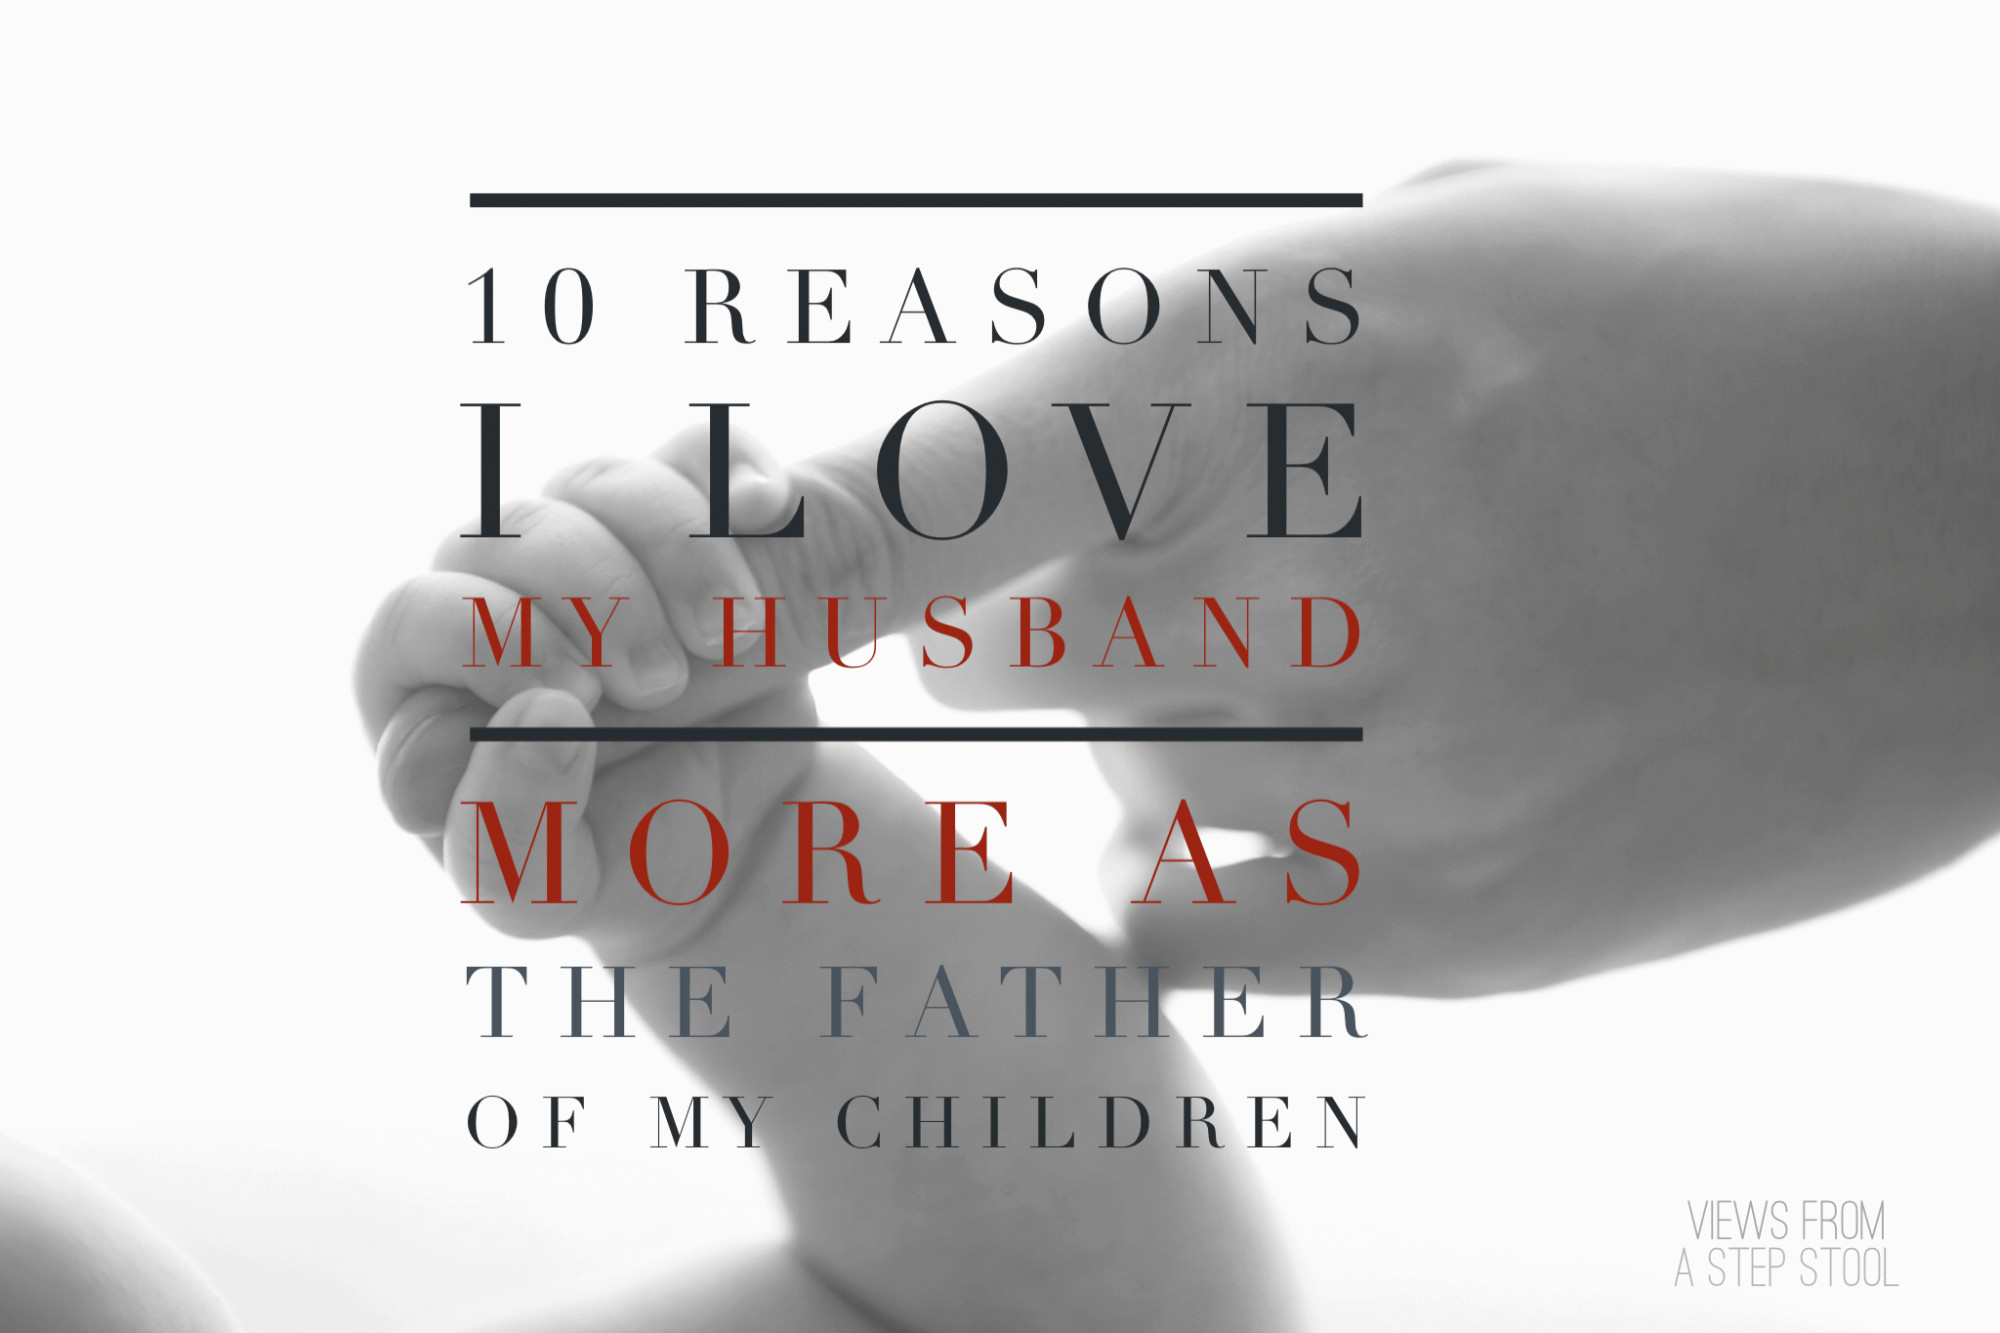 I Love The Father Of My Child Quotes
 10 Reasons I Love My Husband More as The Father of My